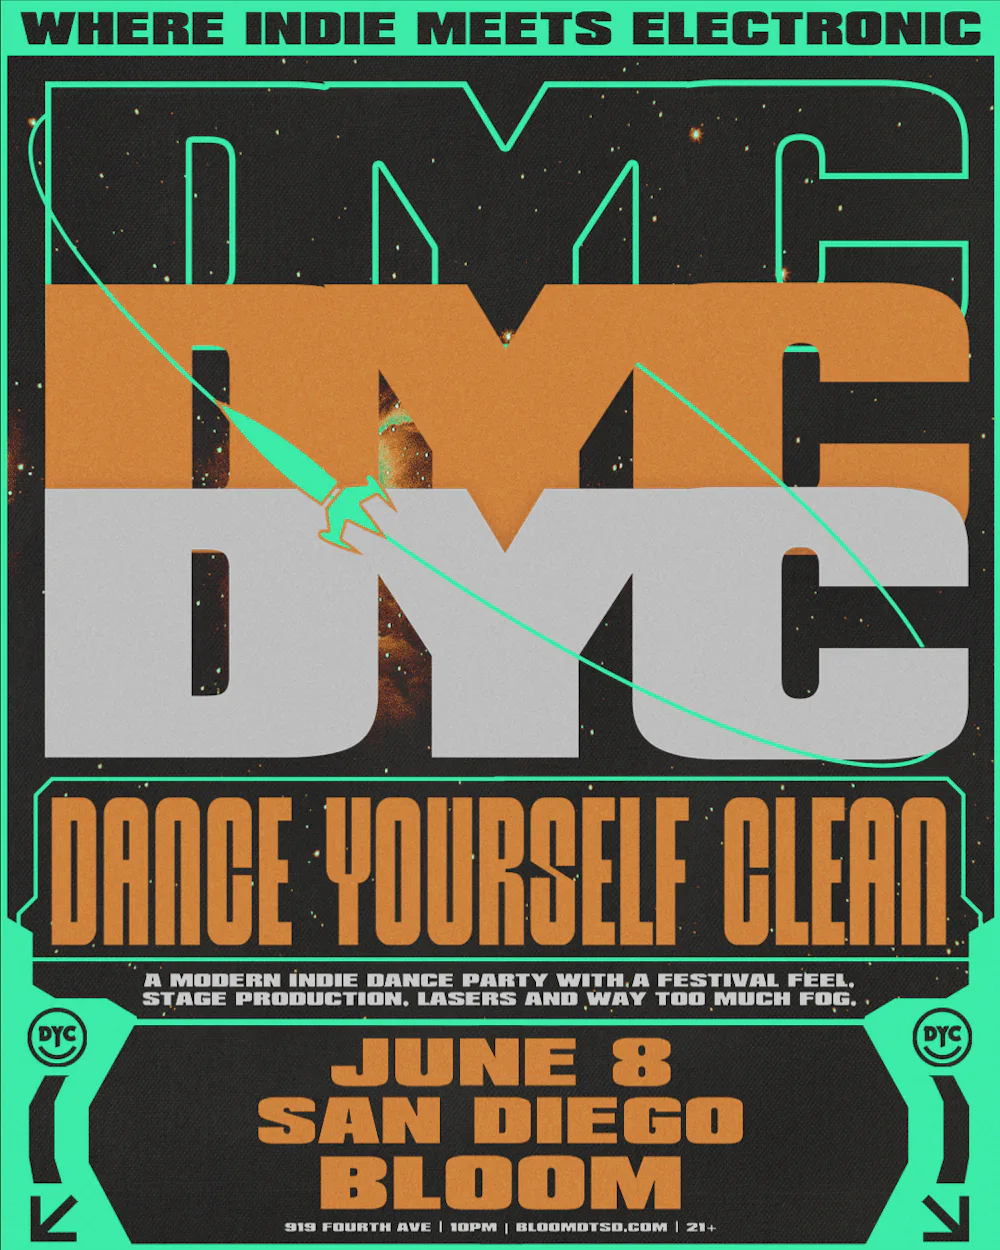 Dance Yourself Clean